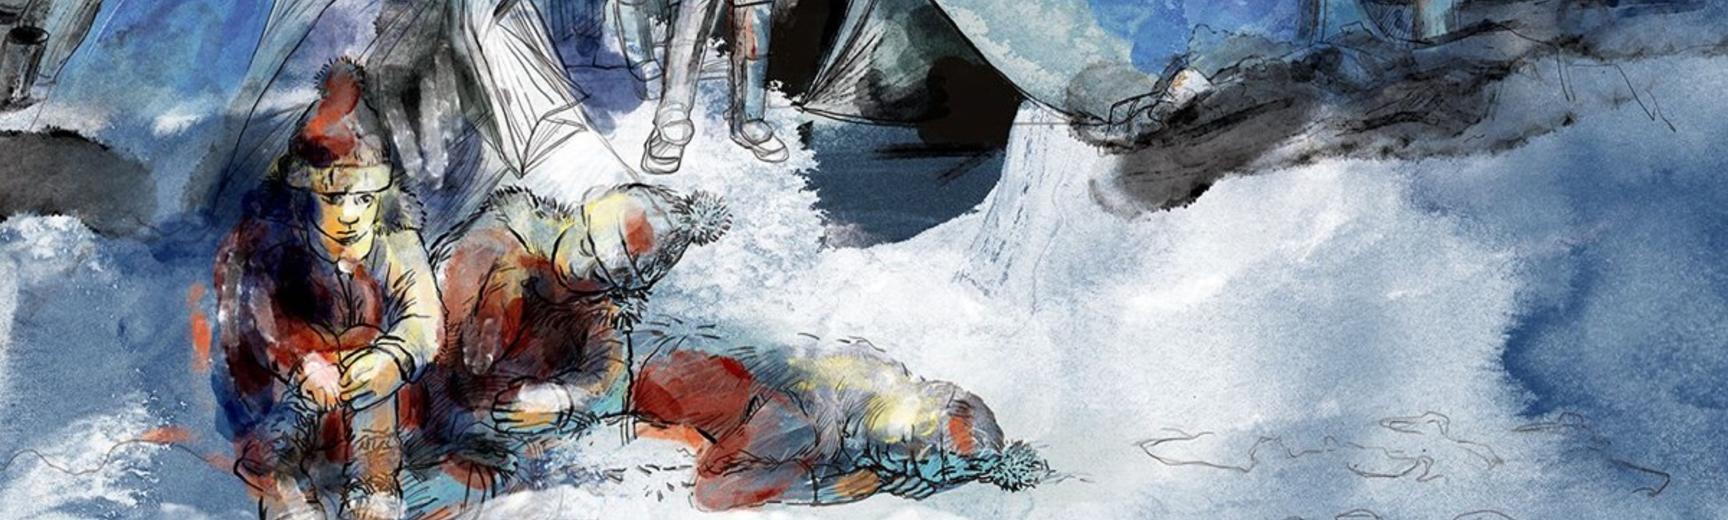 Painting portraying the Lande encampment covered by snow with two men sitting close to their tent